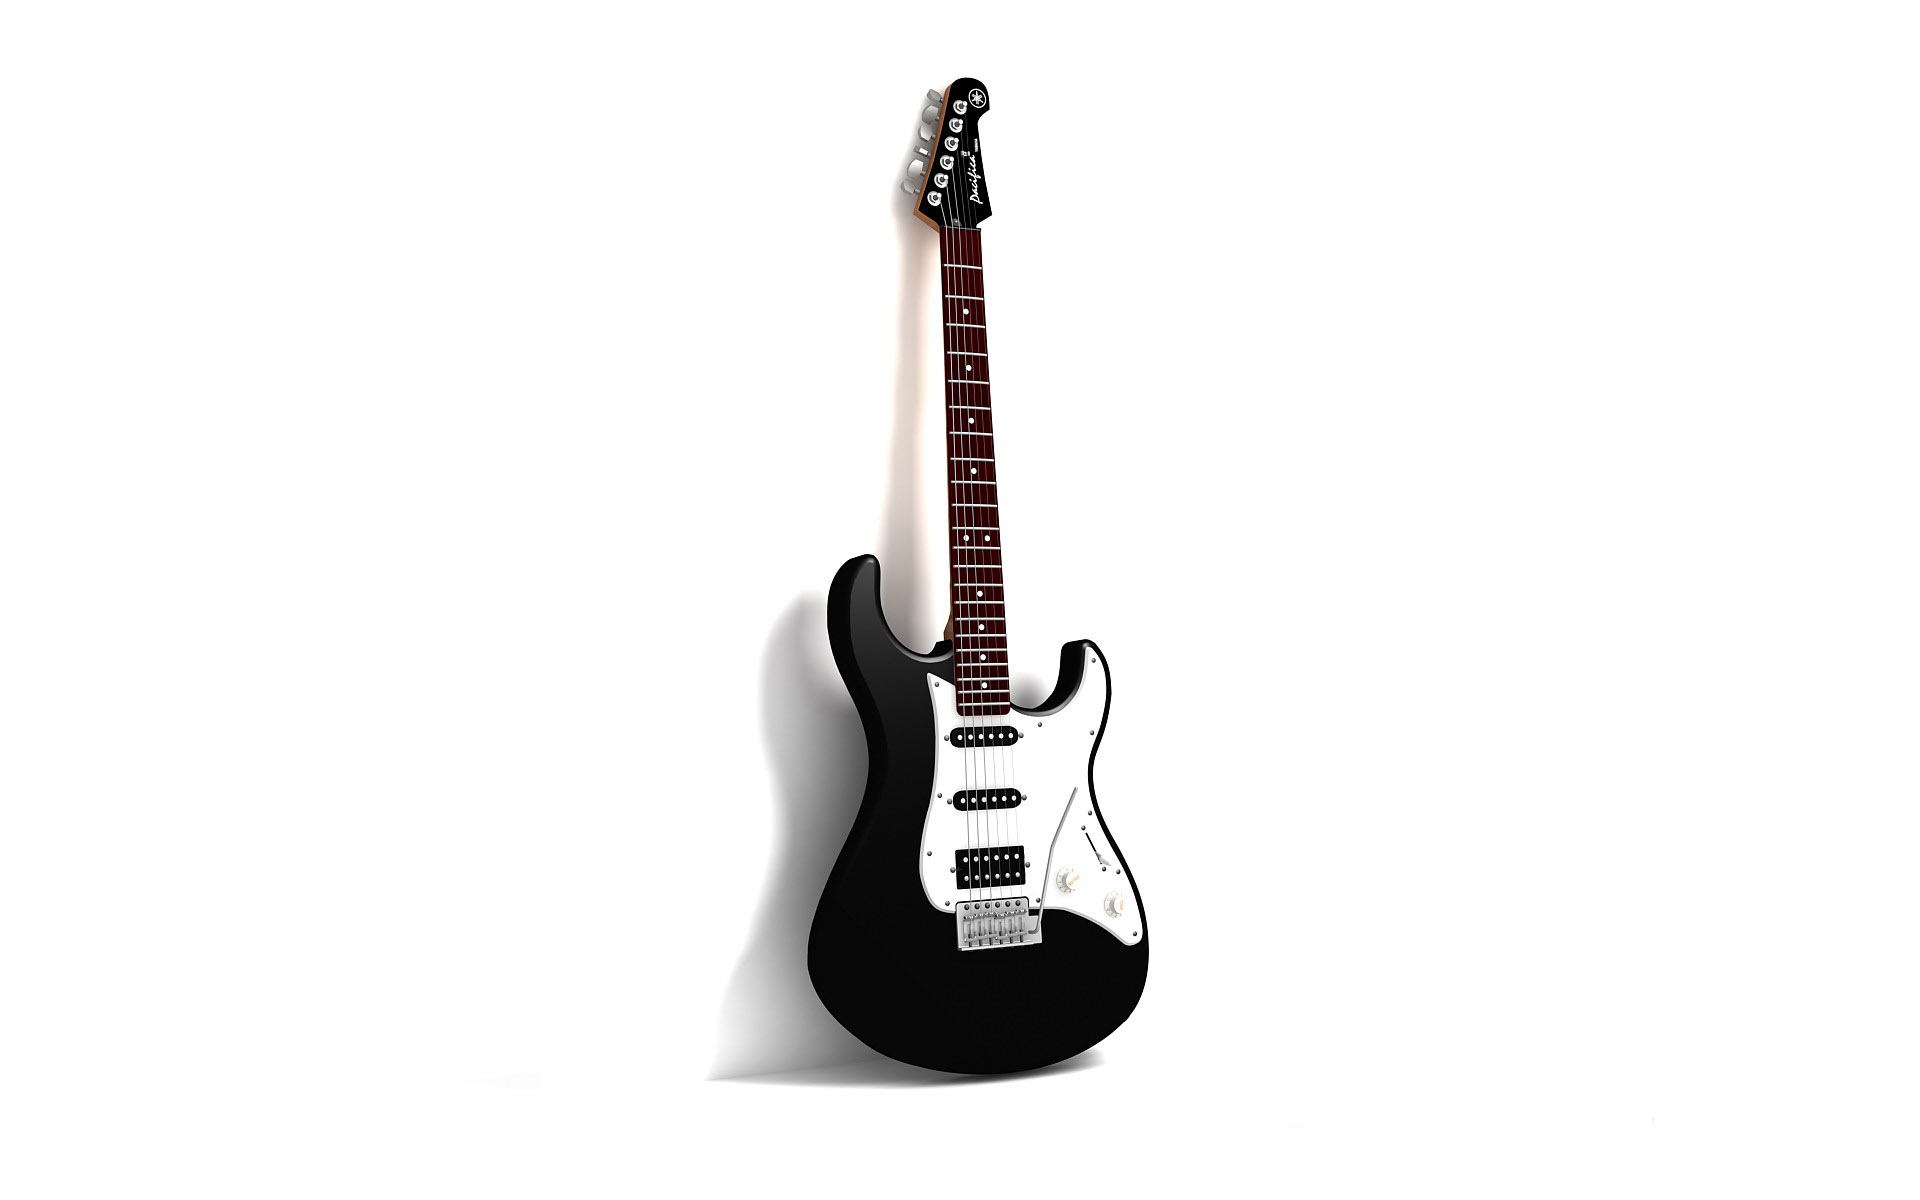 Electric Guitar Background - Wallpaper, High Definition, High Quality ... Electric Guitar Wallpapers